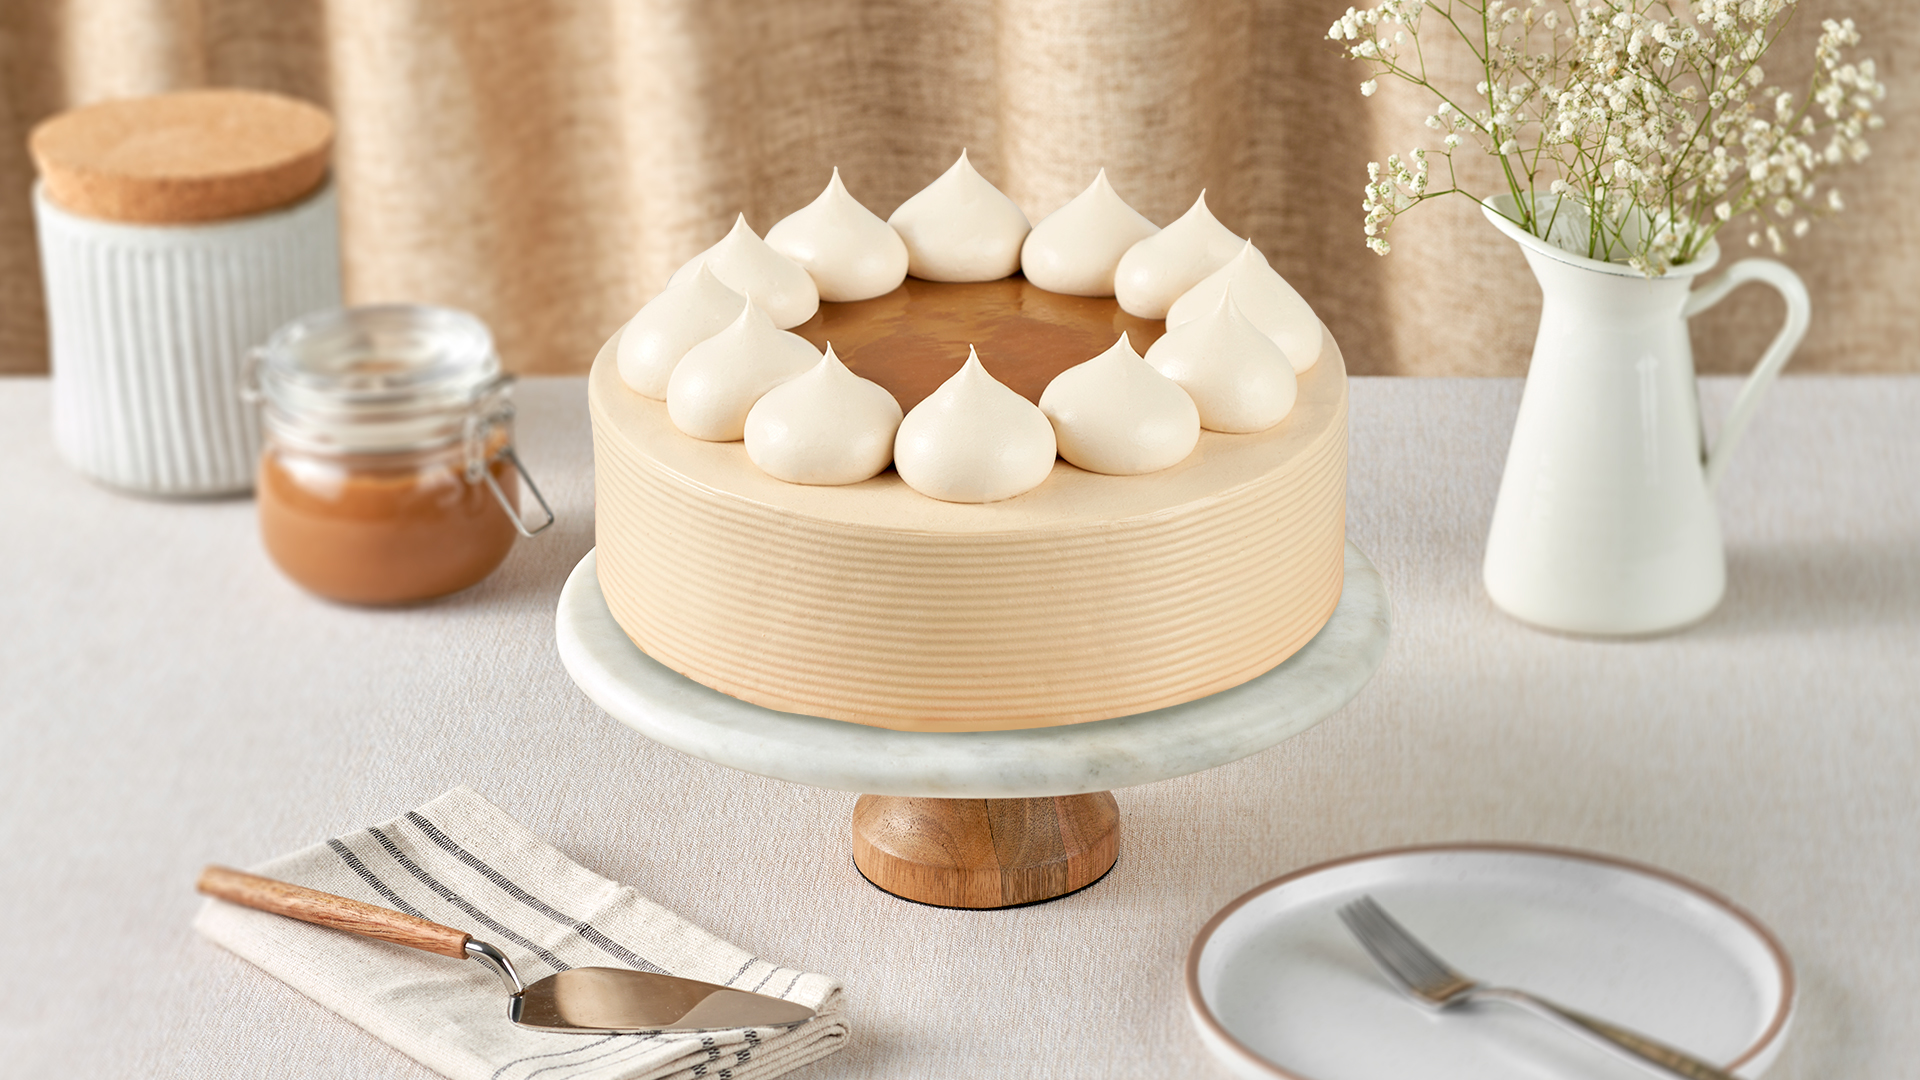 Why Red Ribbon’s NEW Caramel Delight Cake is the creamy, light caramel sensation you need to try